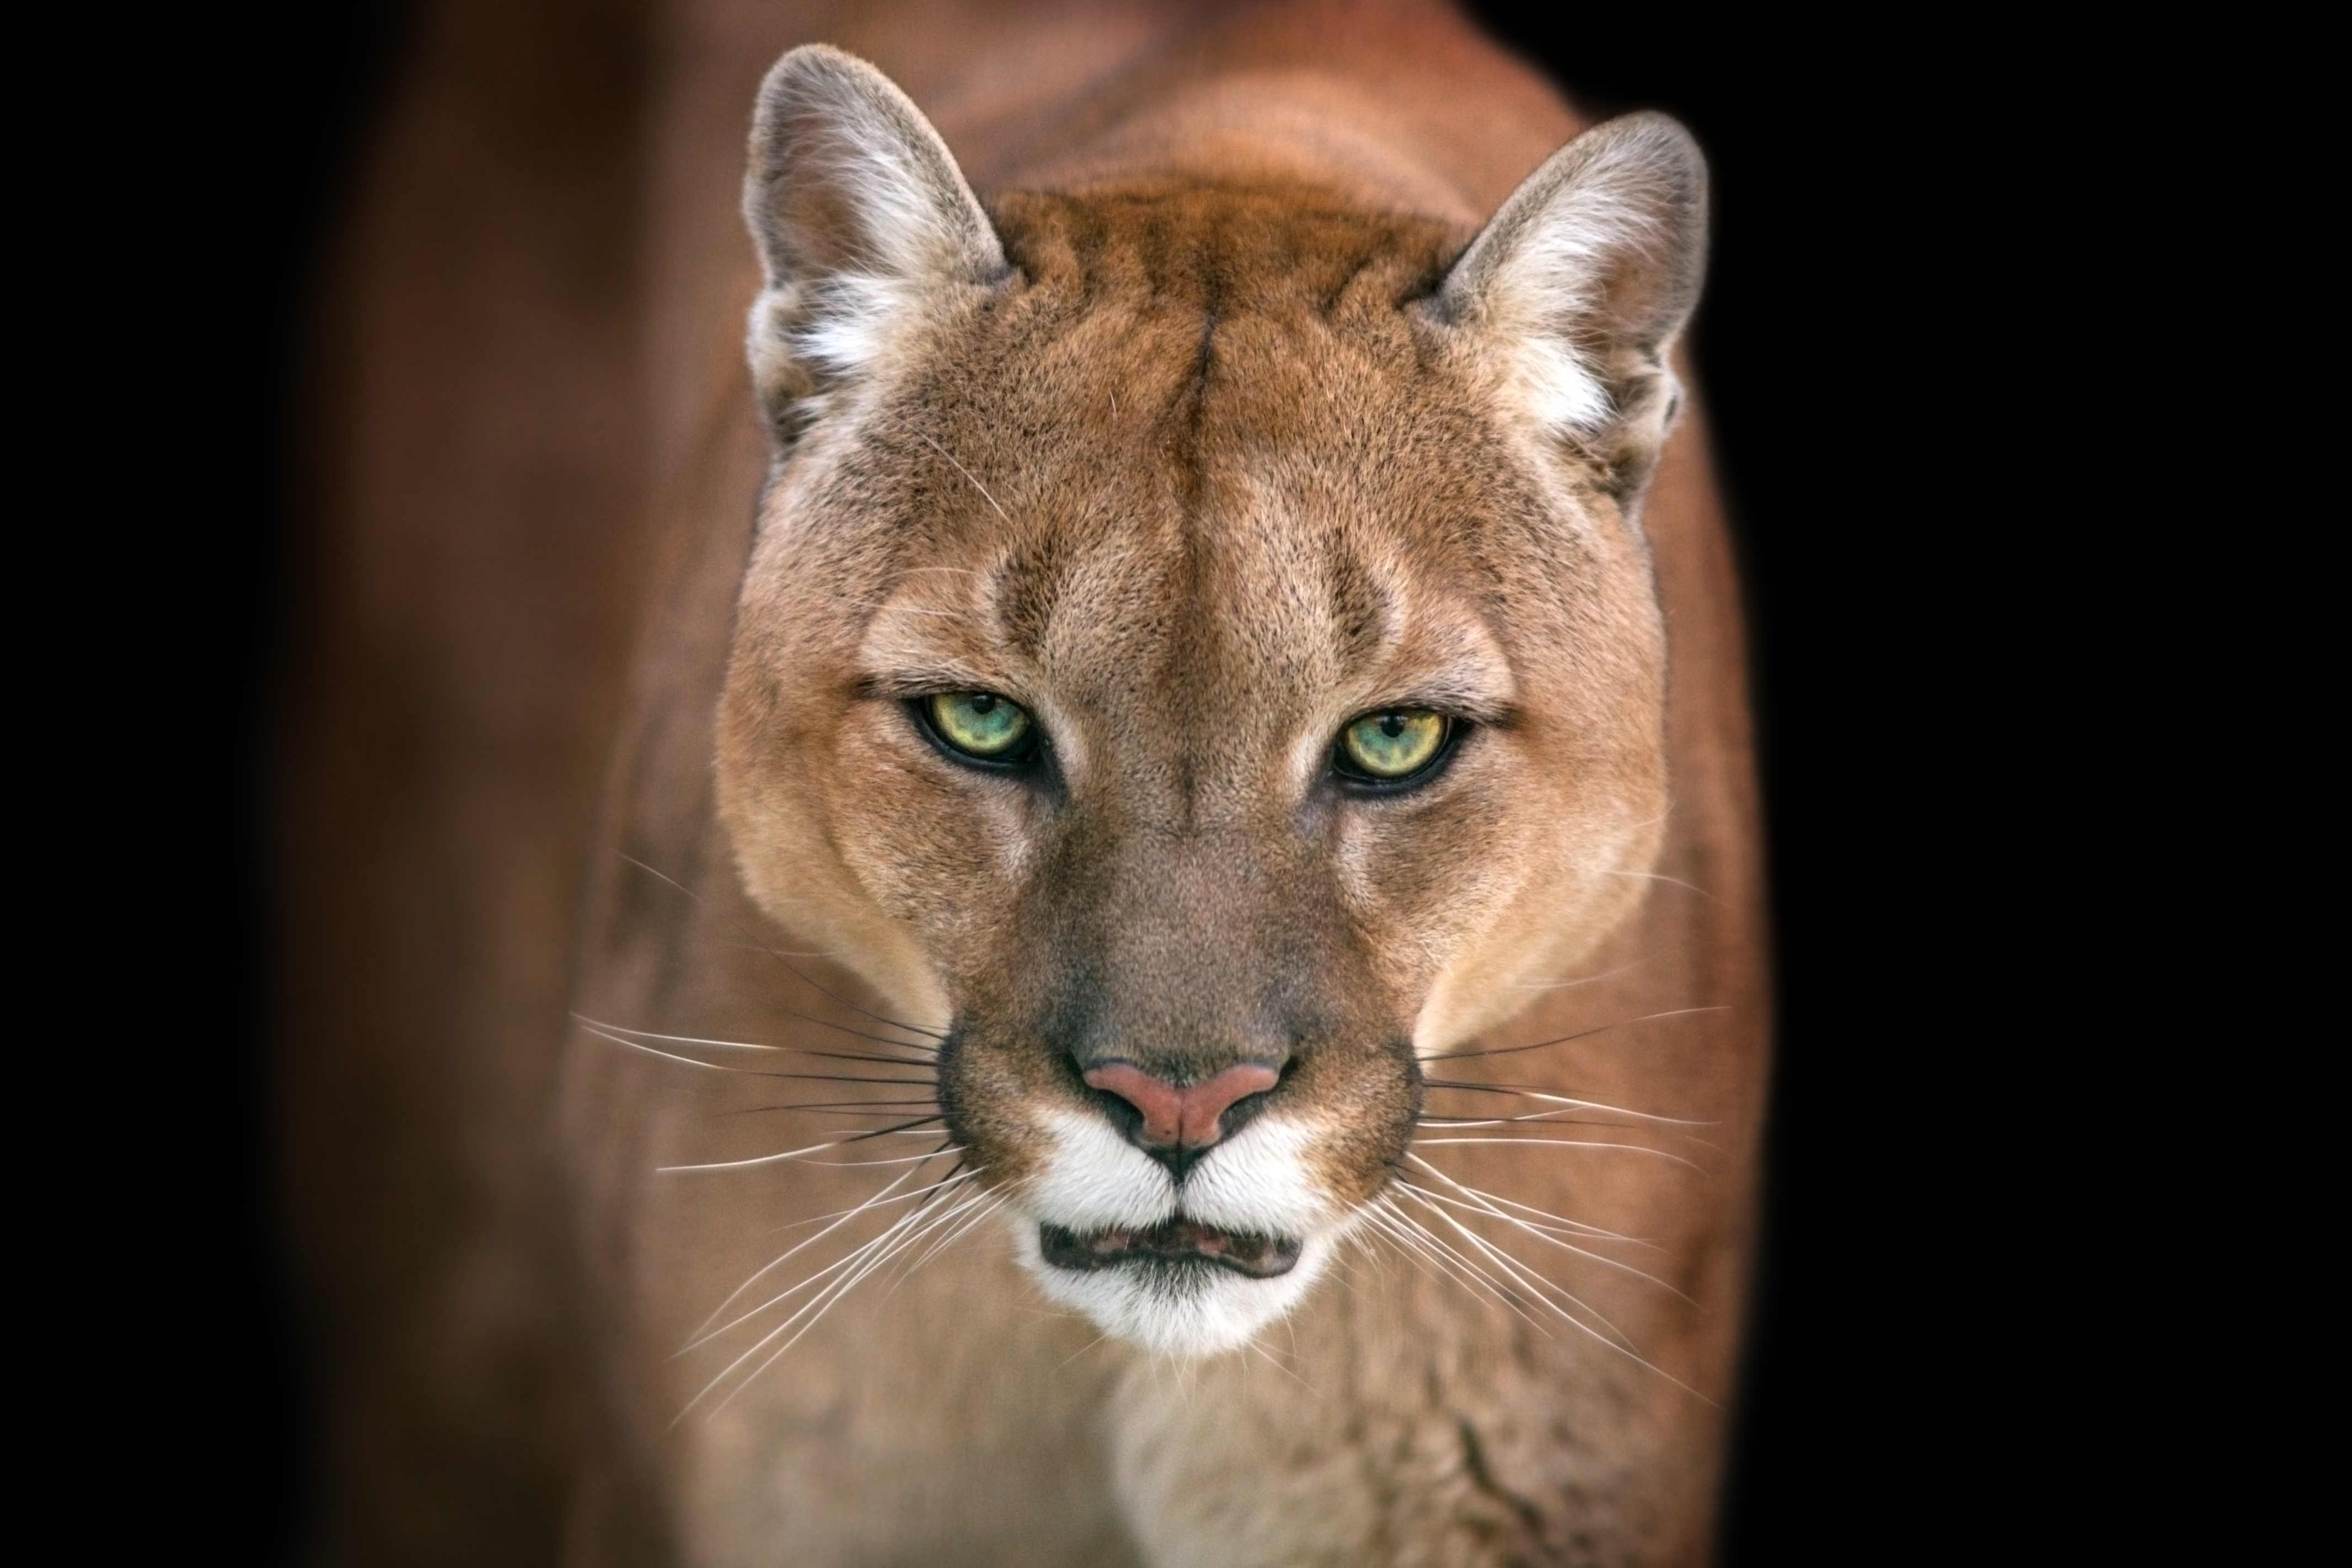 Well, it's not really that scary of a picture. But contrary to what is shown here, the mountain lion is a truly dangerous creature. It will kill your entire livestock if given the chance.